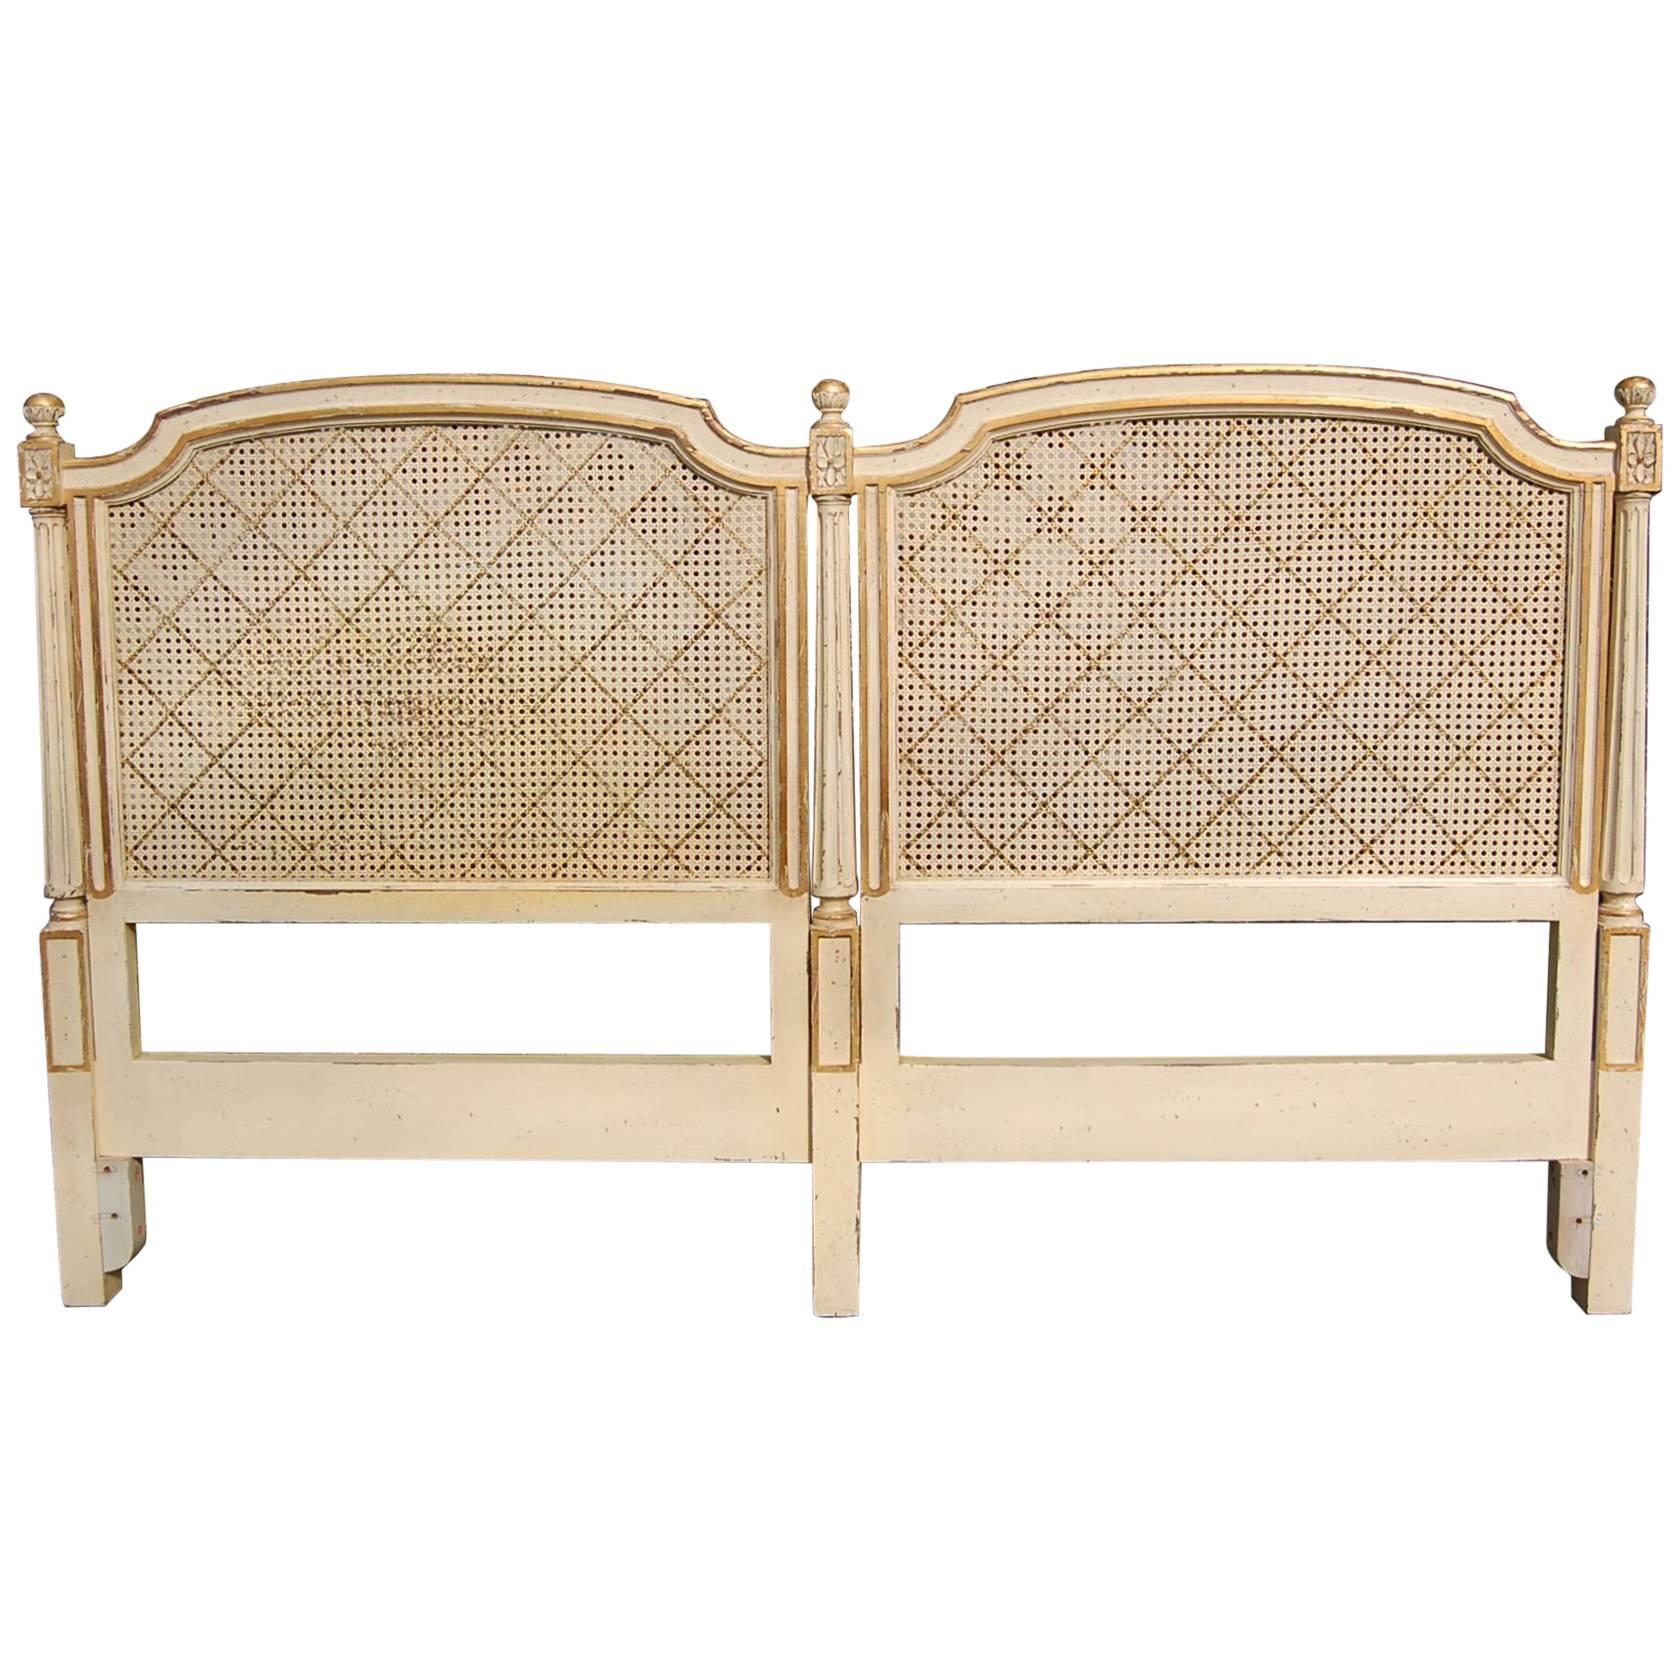 Louis XVI Style King-Size Headboard with Caned Inserts by Louis Solomon , 1970's